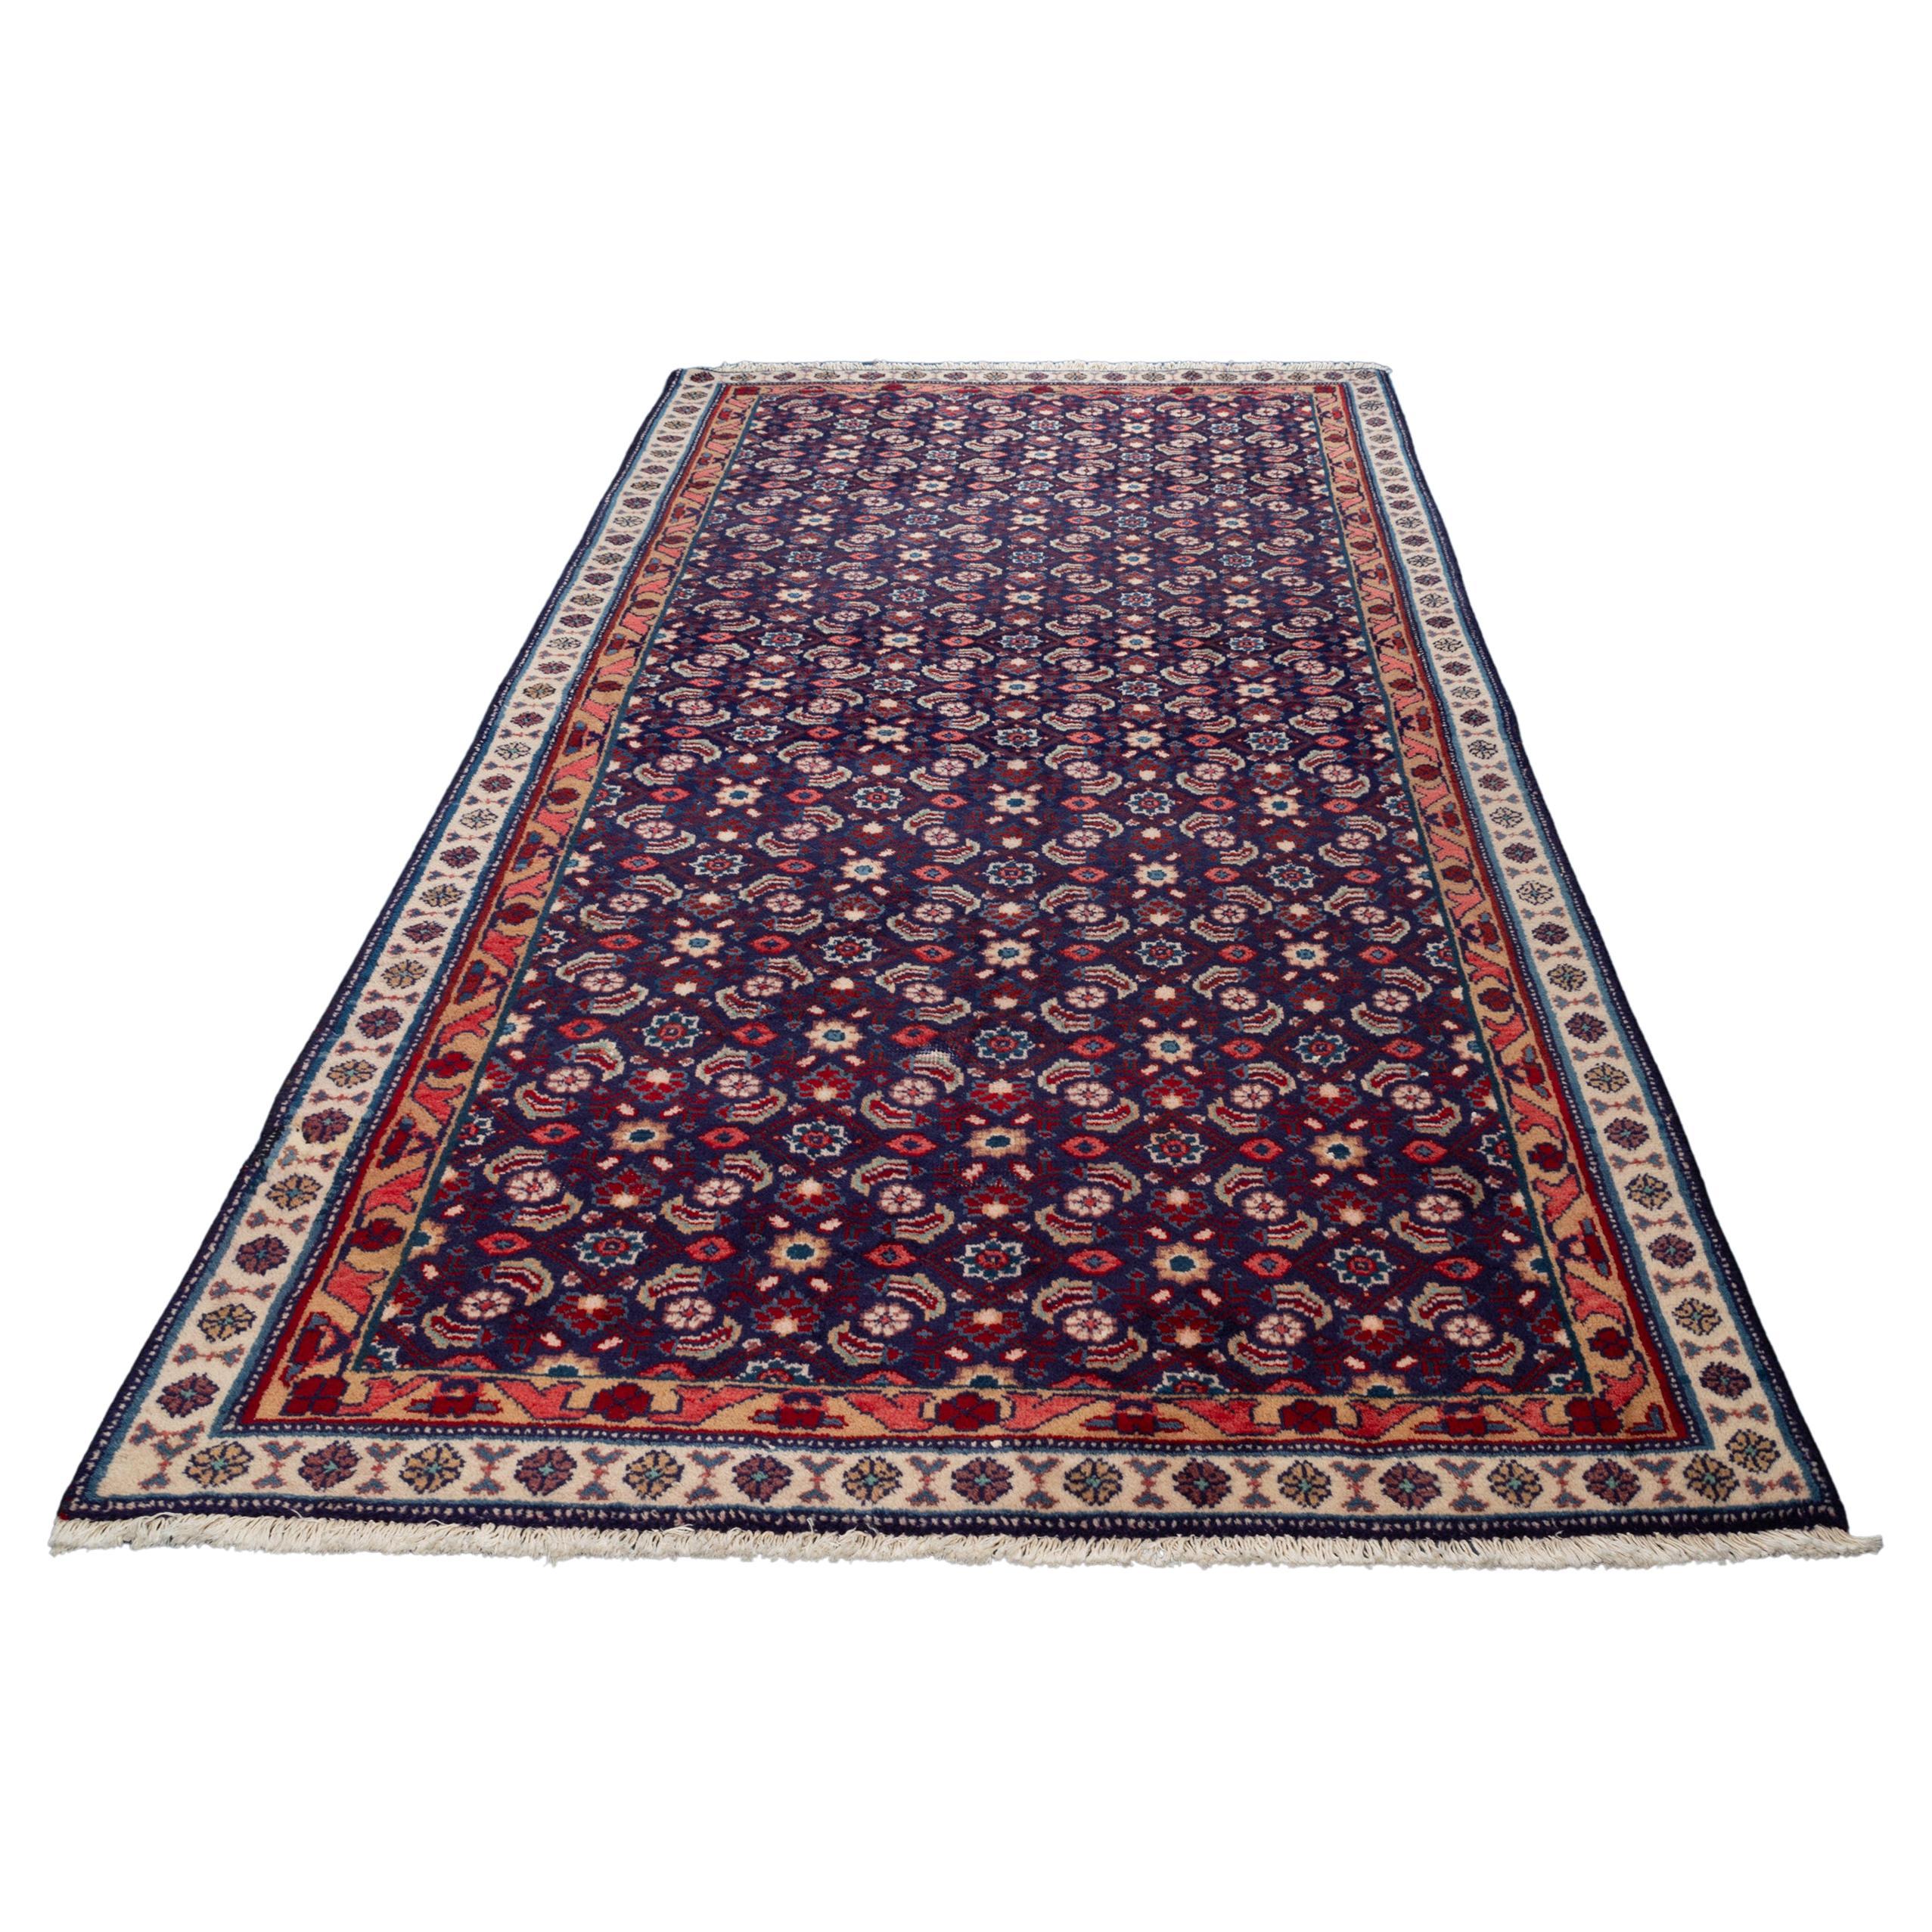 Persian Bijar hand-knotted rug

Thick tightly woven rug with double knots and excellent quality wool on a cotton foundation.
Late 20th century 

Measures: 142 x 276 cm.

Excellent condition.